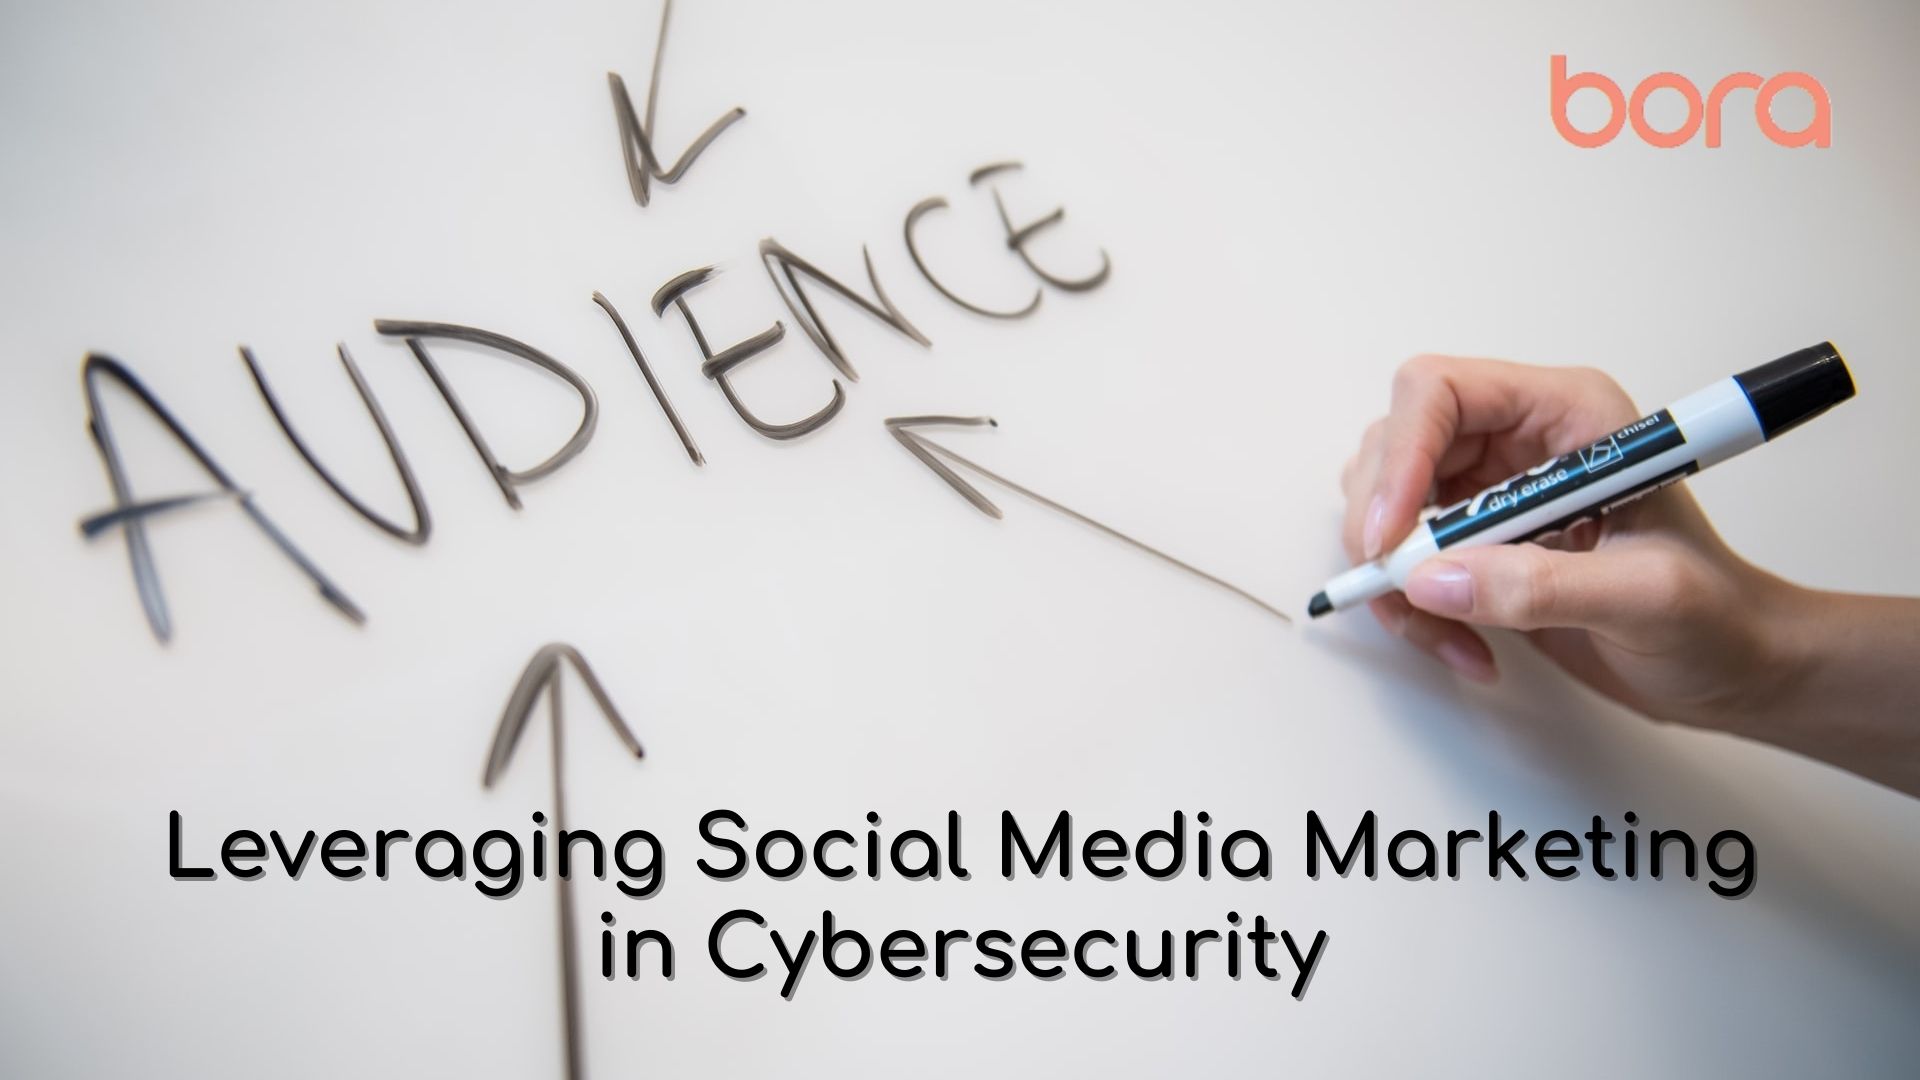 Leveraging Social Media Marketing in the Cybersecurity Industry